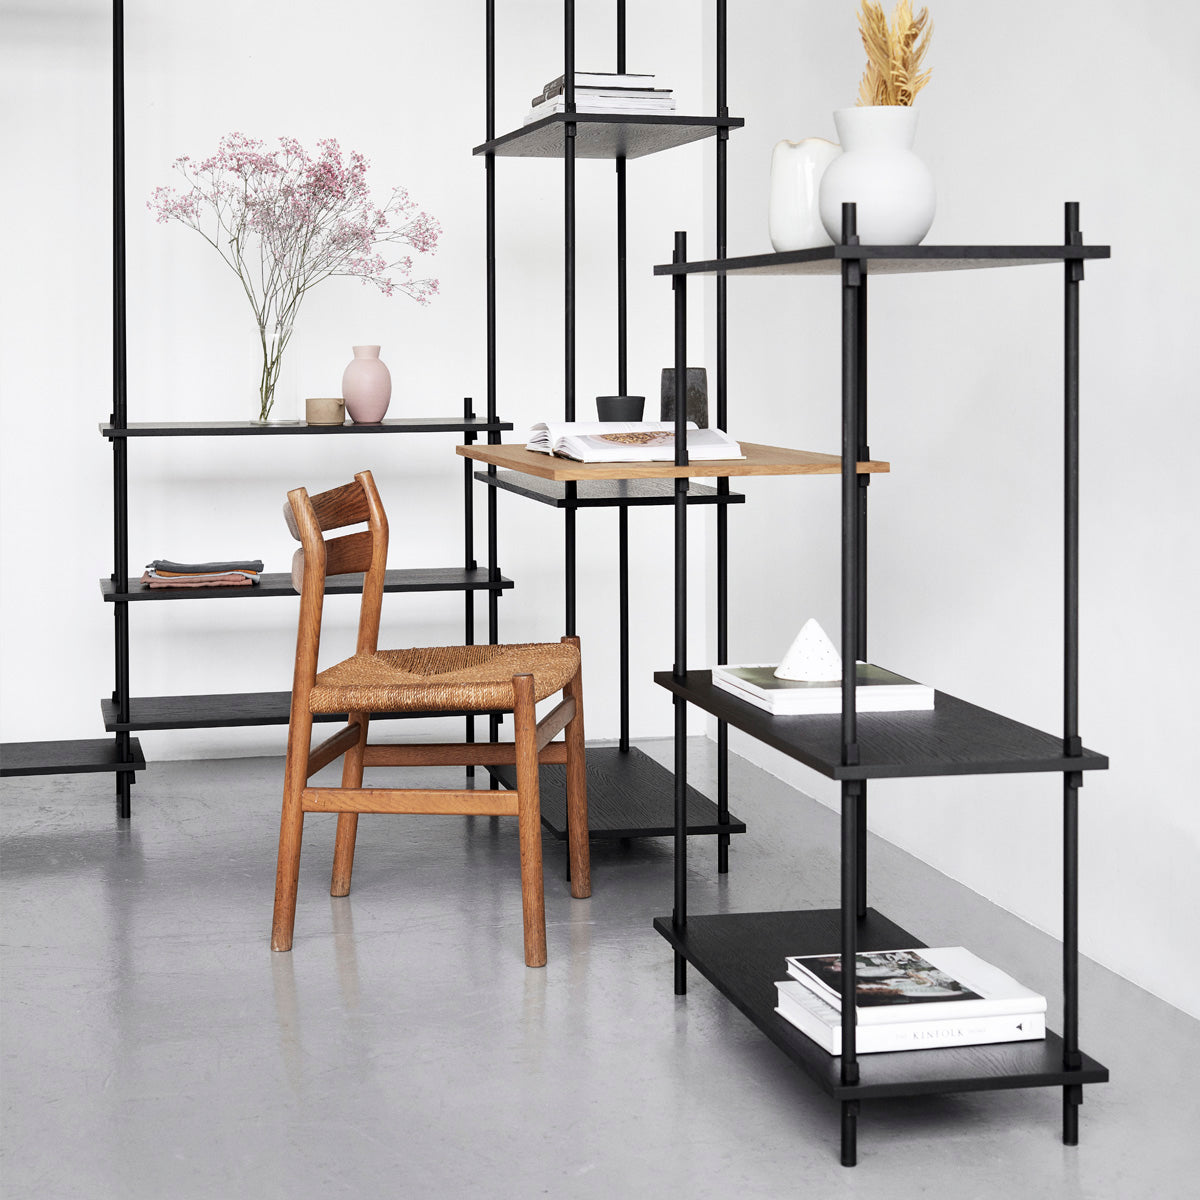 Shelving System Double H200 With Wardrobe Black-Black